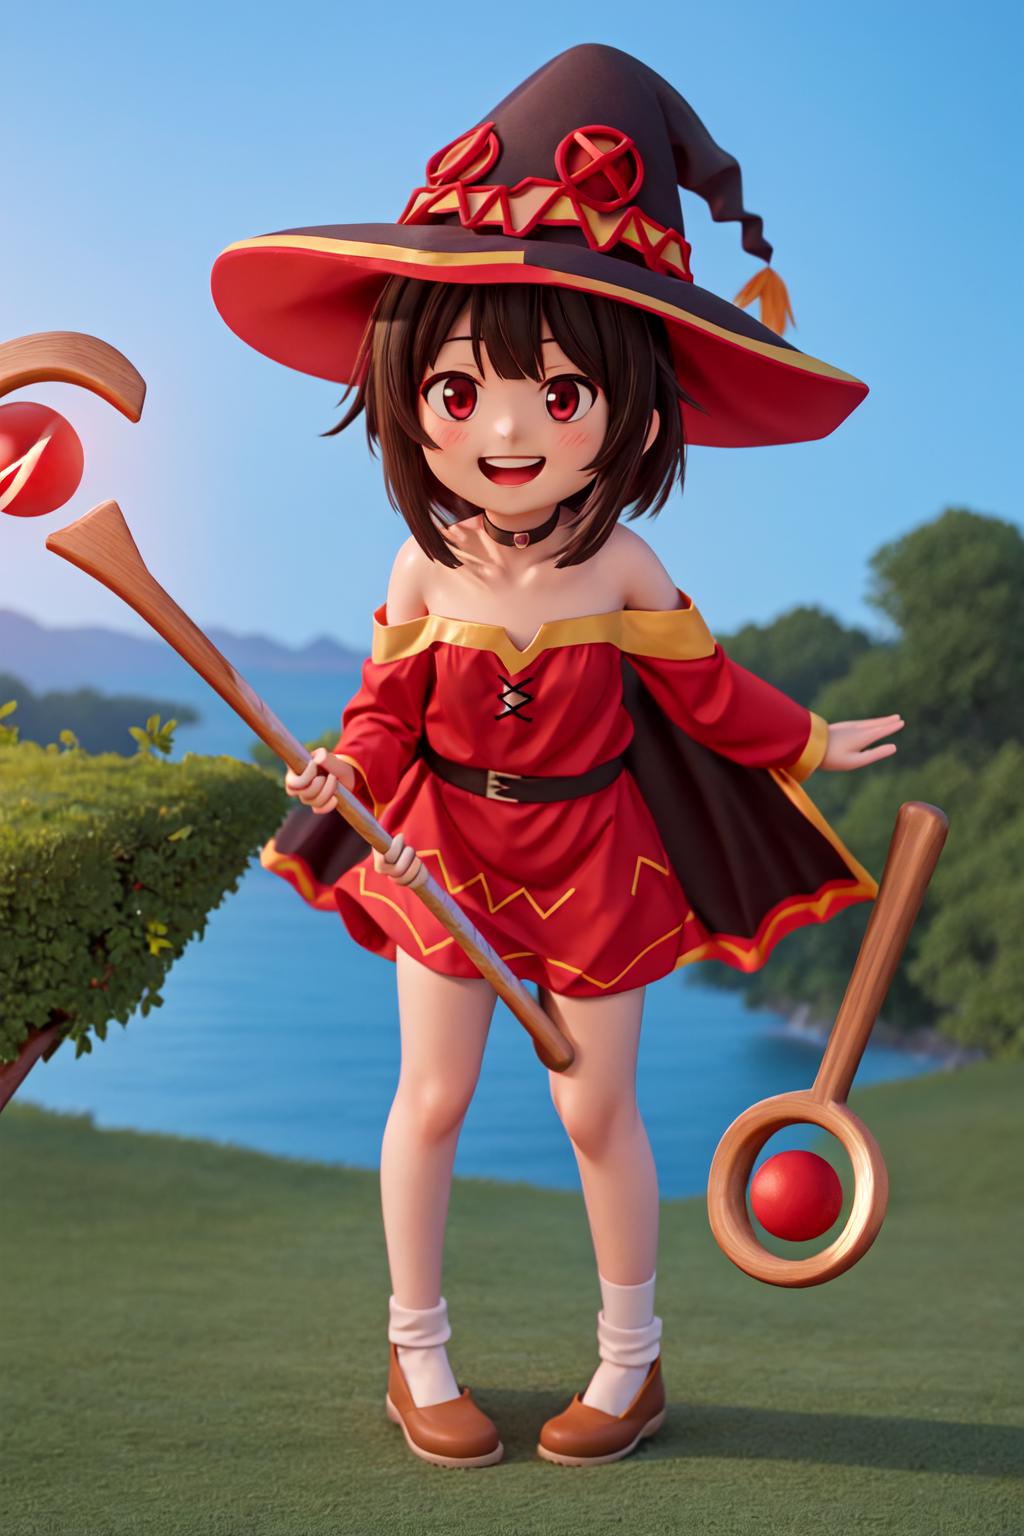 Cartoon character with a red hat, holding a wand and a ball, standing next to a lake.